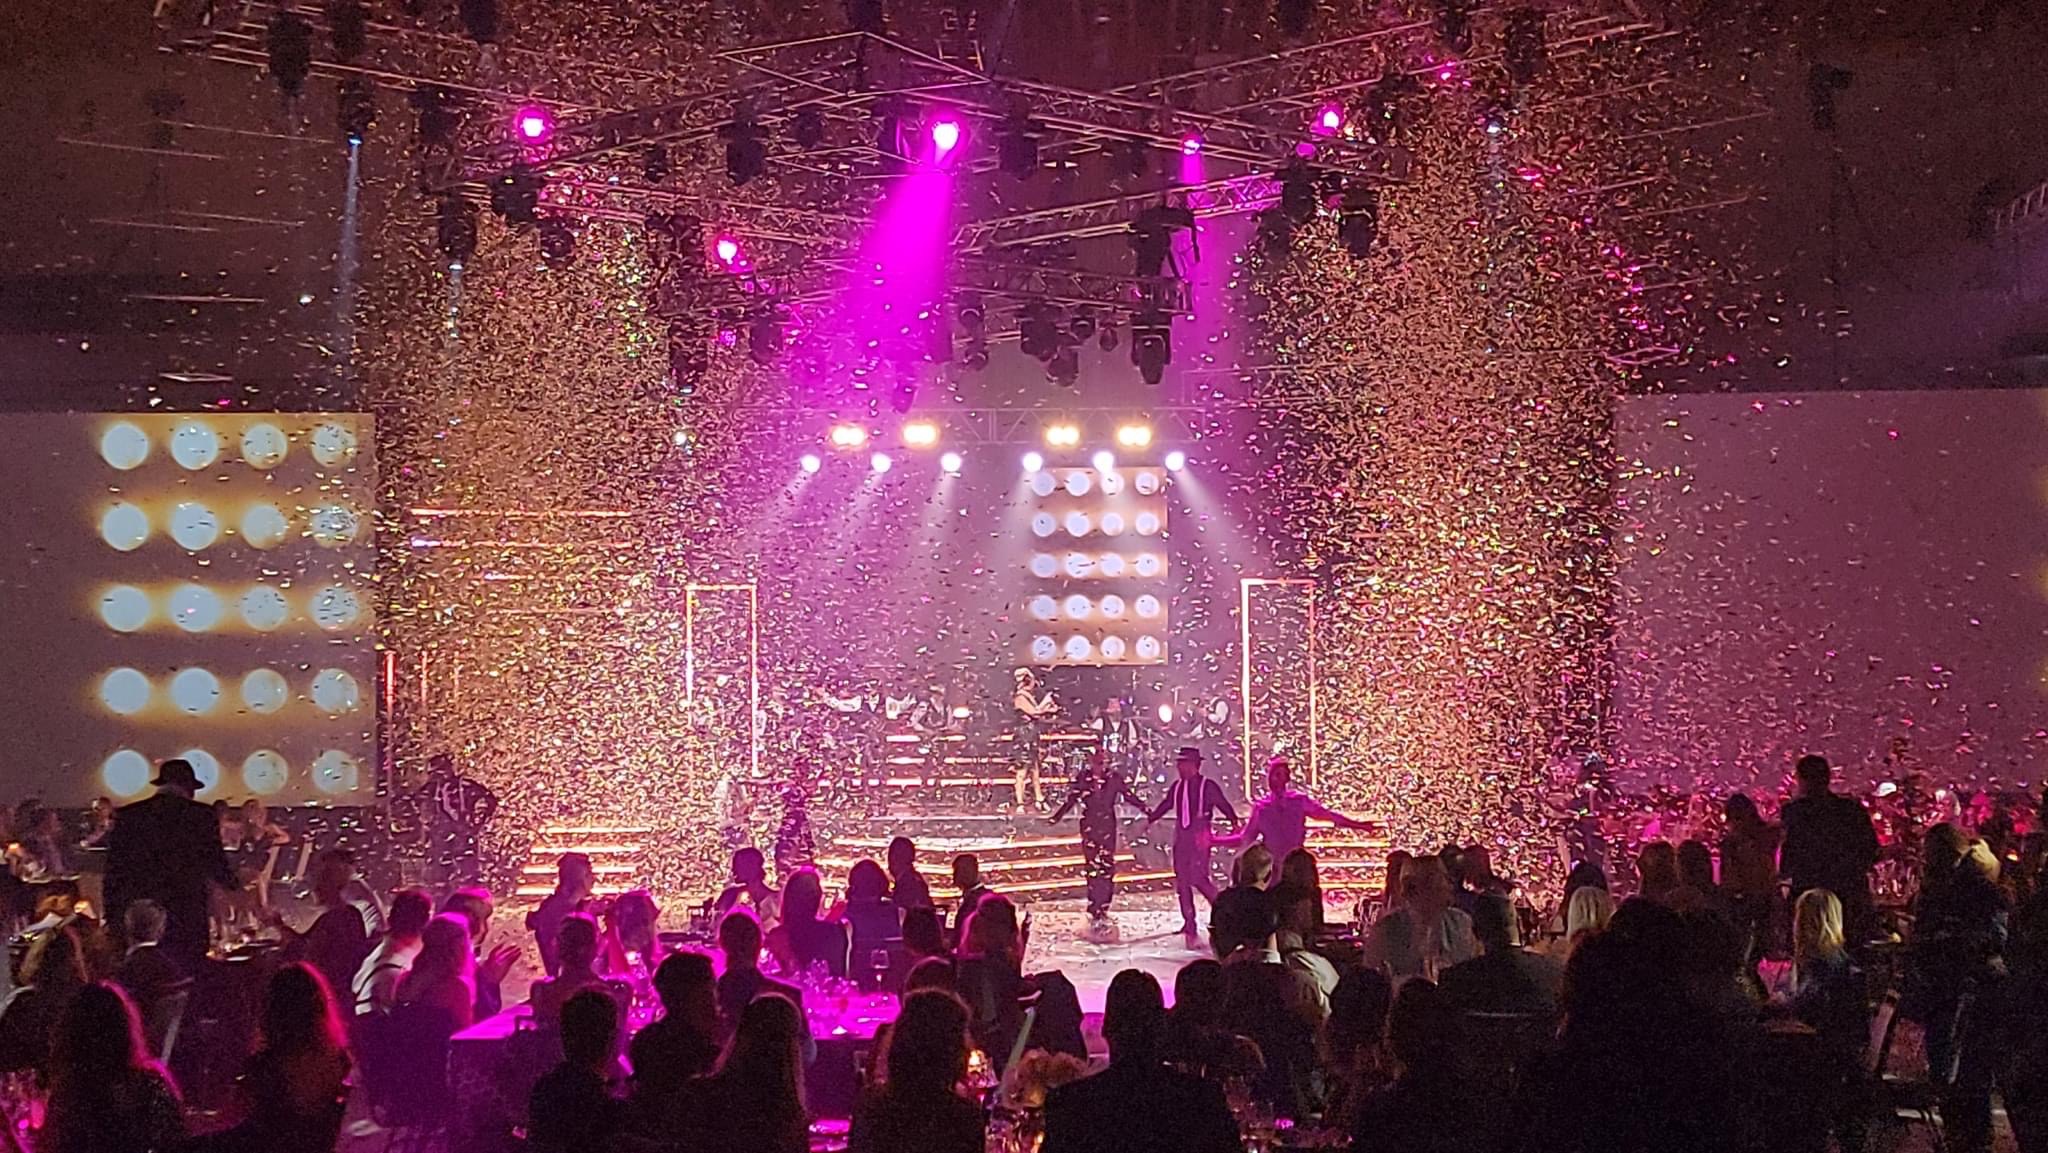 Concert with pink stage lights and confetti